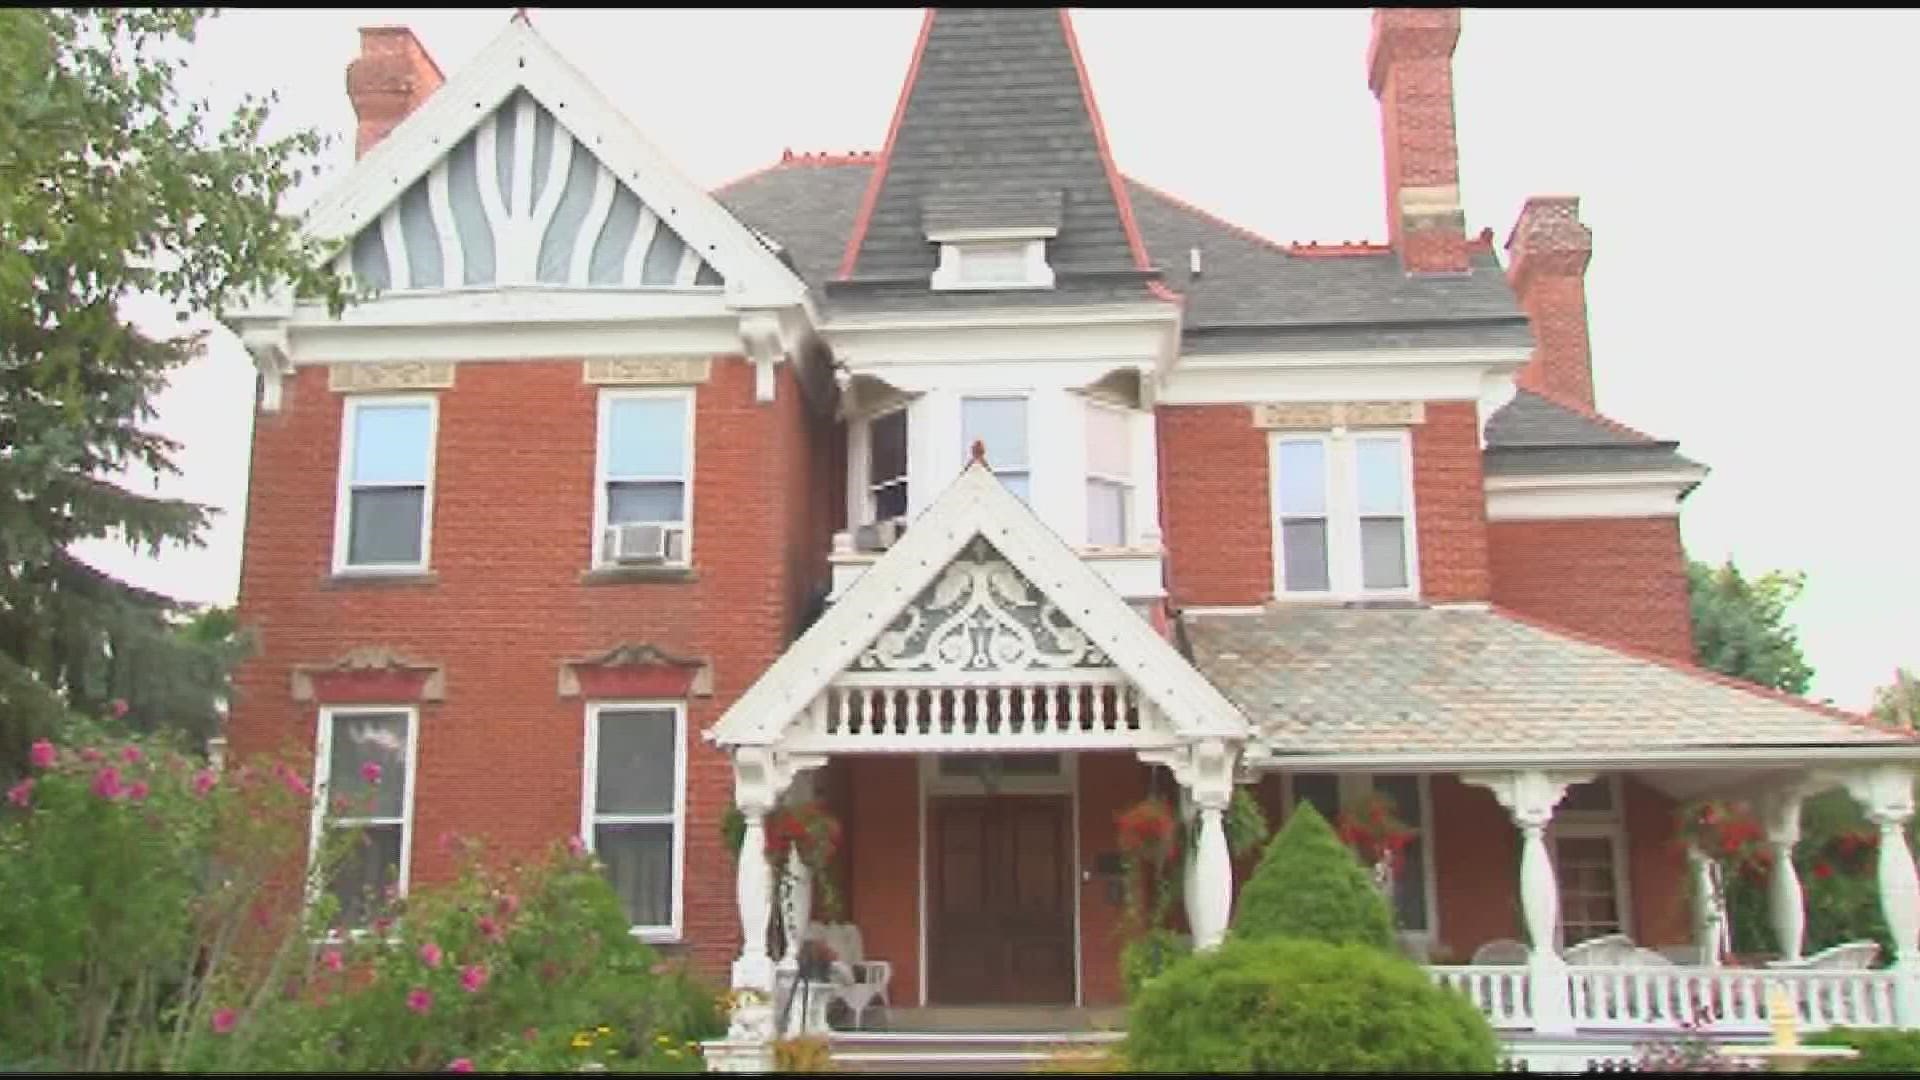 The Grand Kerr House Bed and Breakfast in Grand Rapids, Ohio is going out of business. The owners, Bob and Cathy, are in good health but decided to sleep in later.